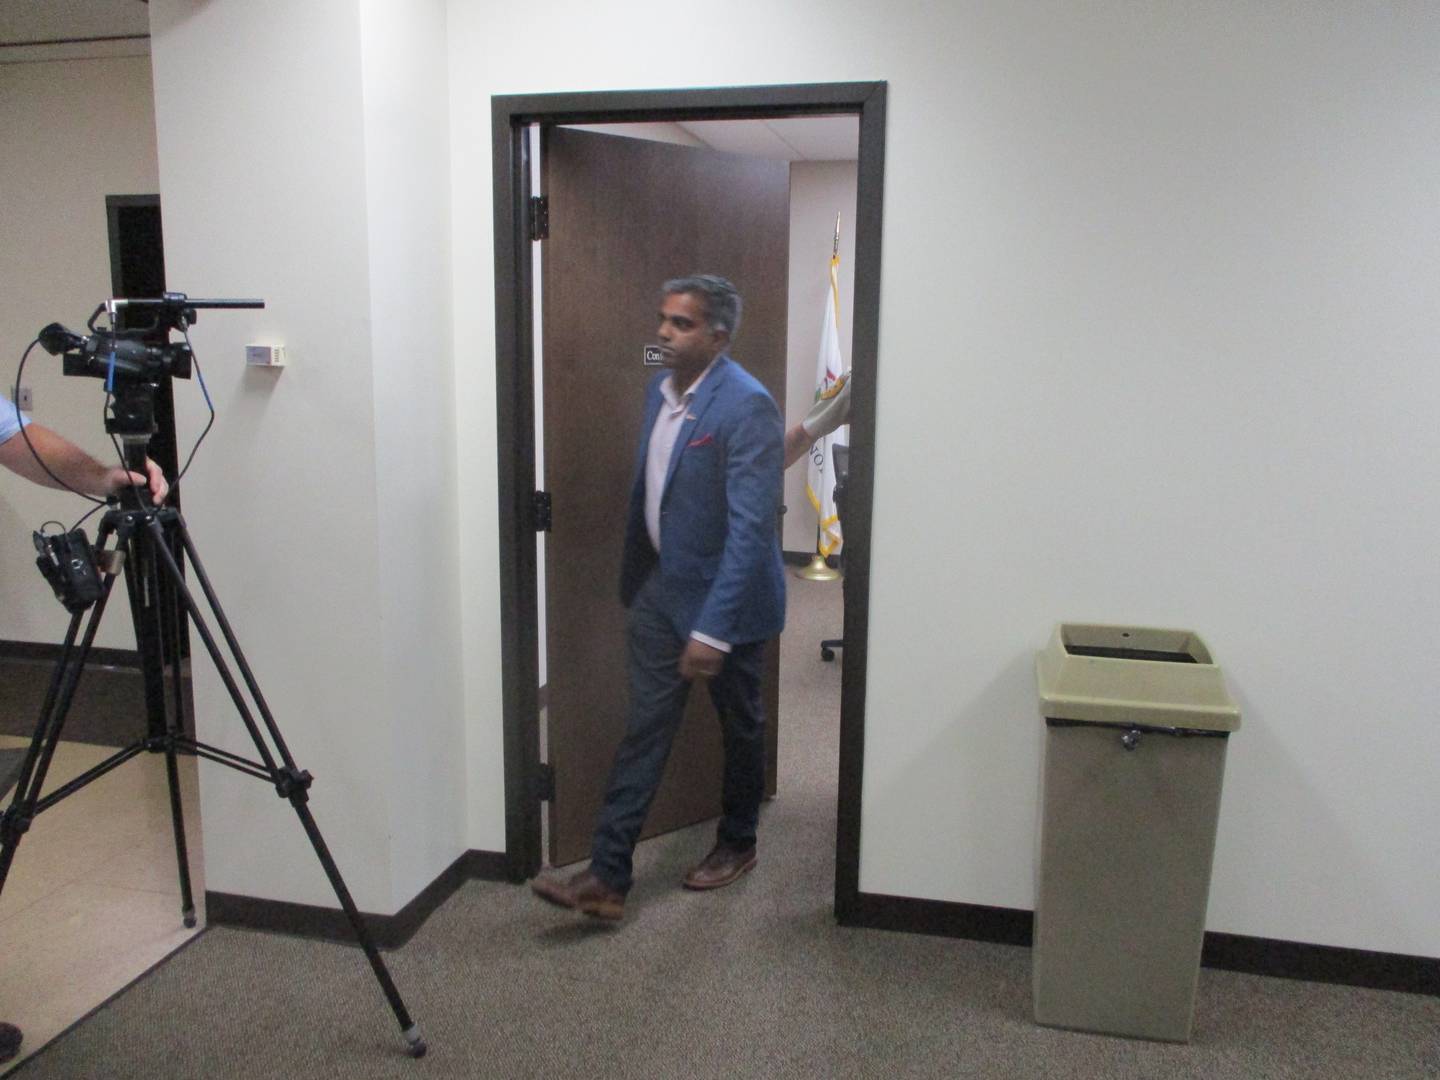 Raj Pillai, an alternate delegate to the Veterans Assistance Commission of Will County, leaves a closed session of the commission's executive board meeting on Thursday, Aug. 4, 2022, in Joliet after being told he could not attend.